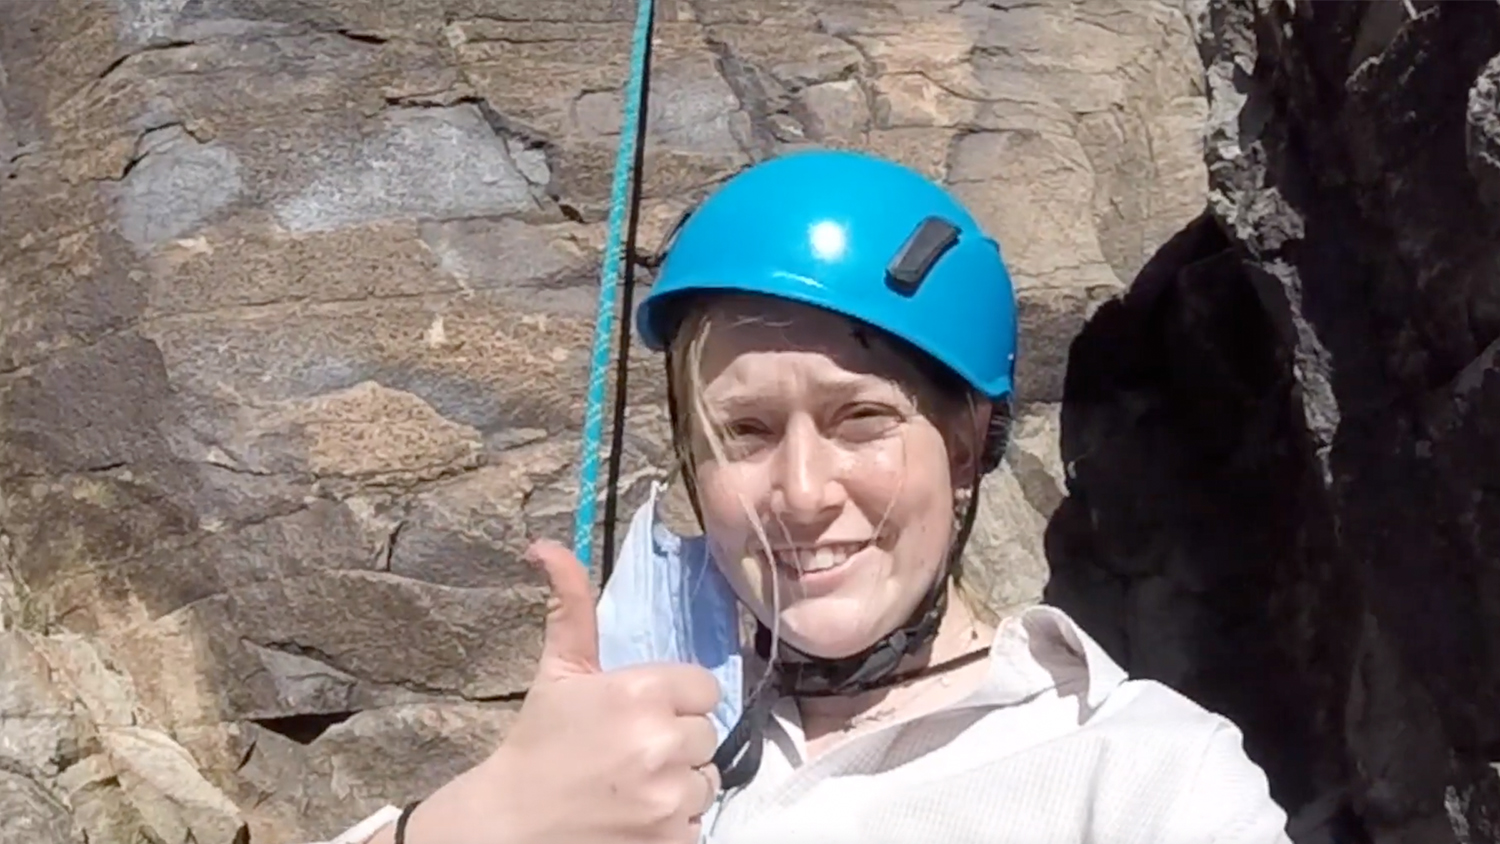 Massey Stichter wearing a teal helmet and making a thumbs up sign while rock climbing